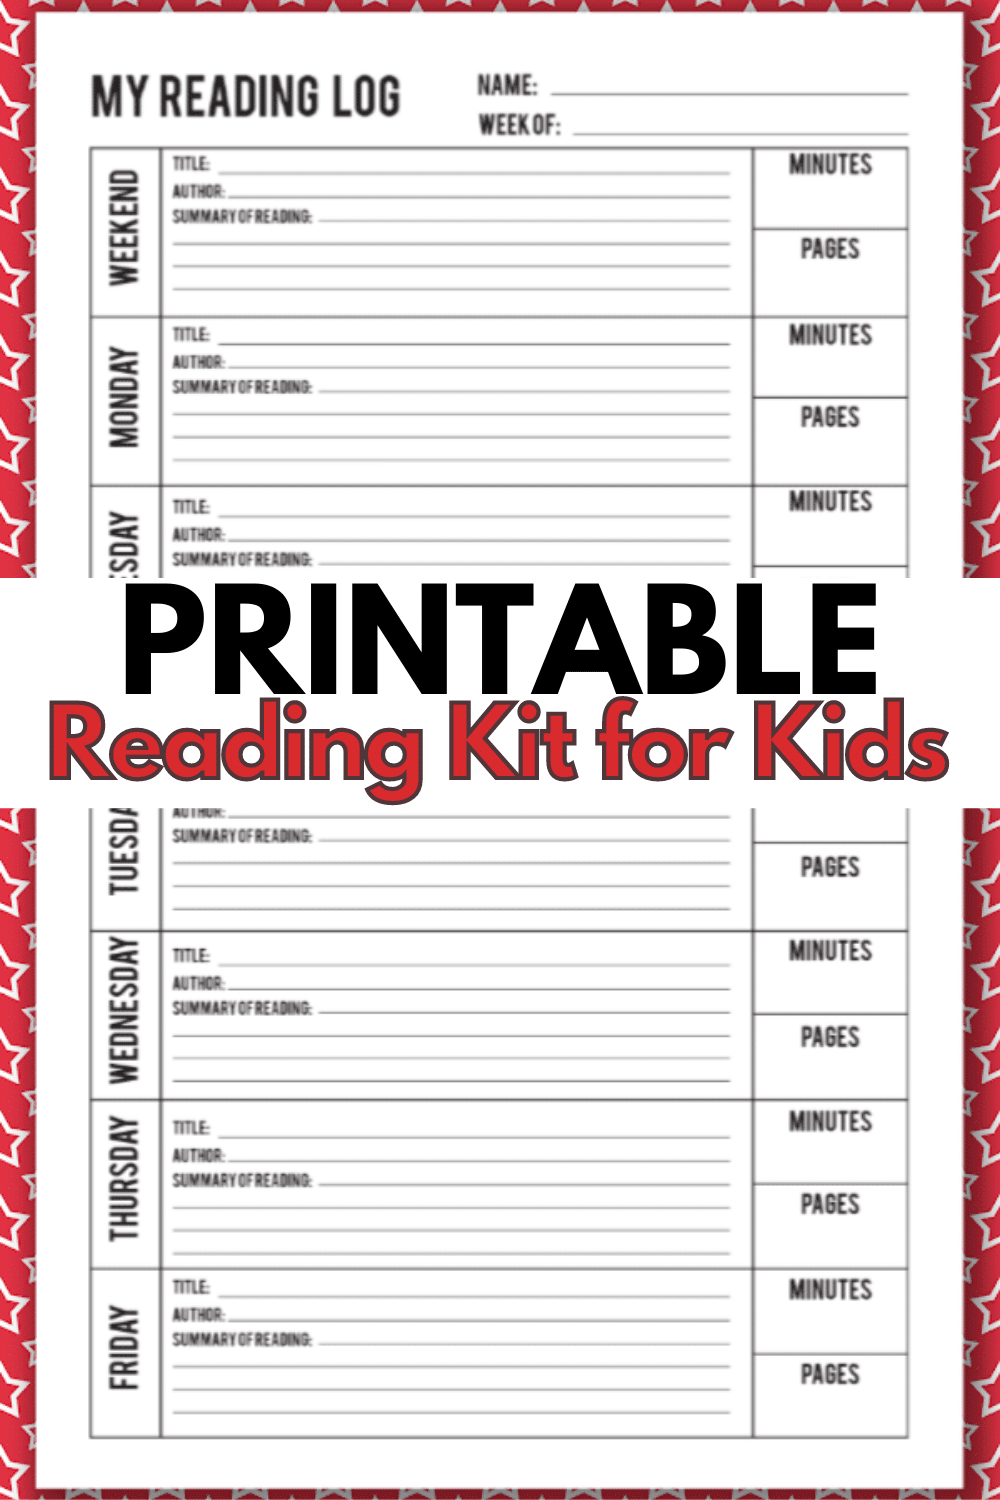 A printable reading kit for kids will help kids stay focused on reading all summer long. A reading log, book report form and bookmarks make this kit great. #printables #reading #education via @wondermomwannab